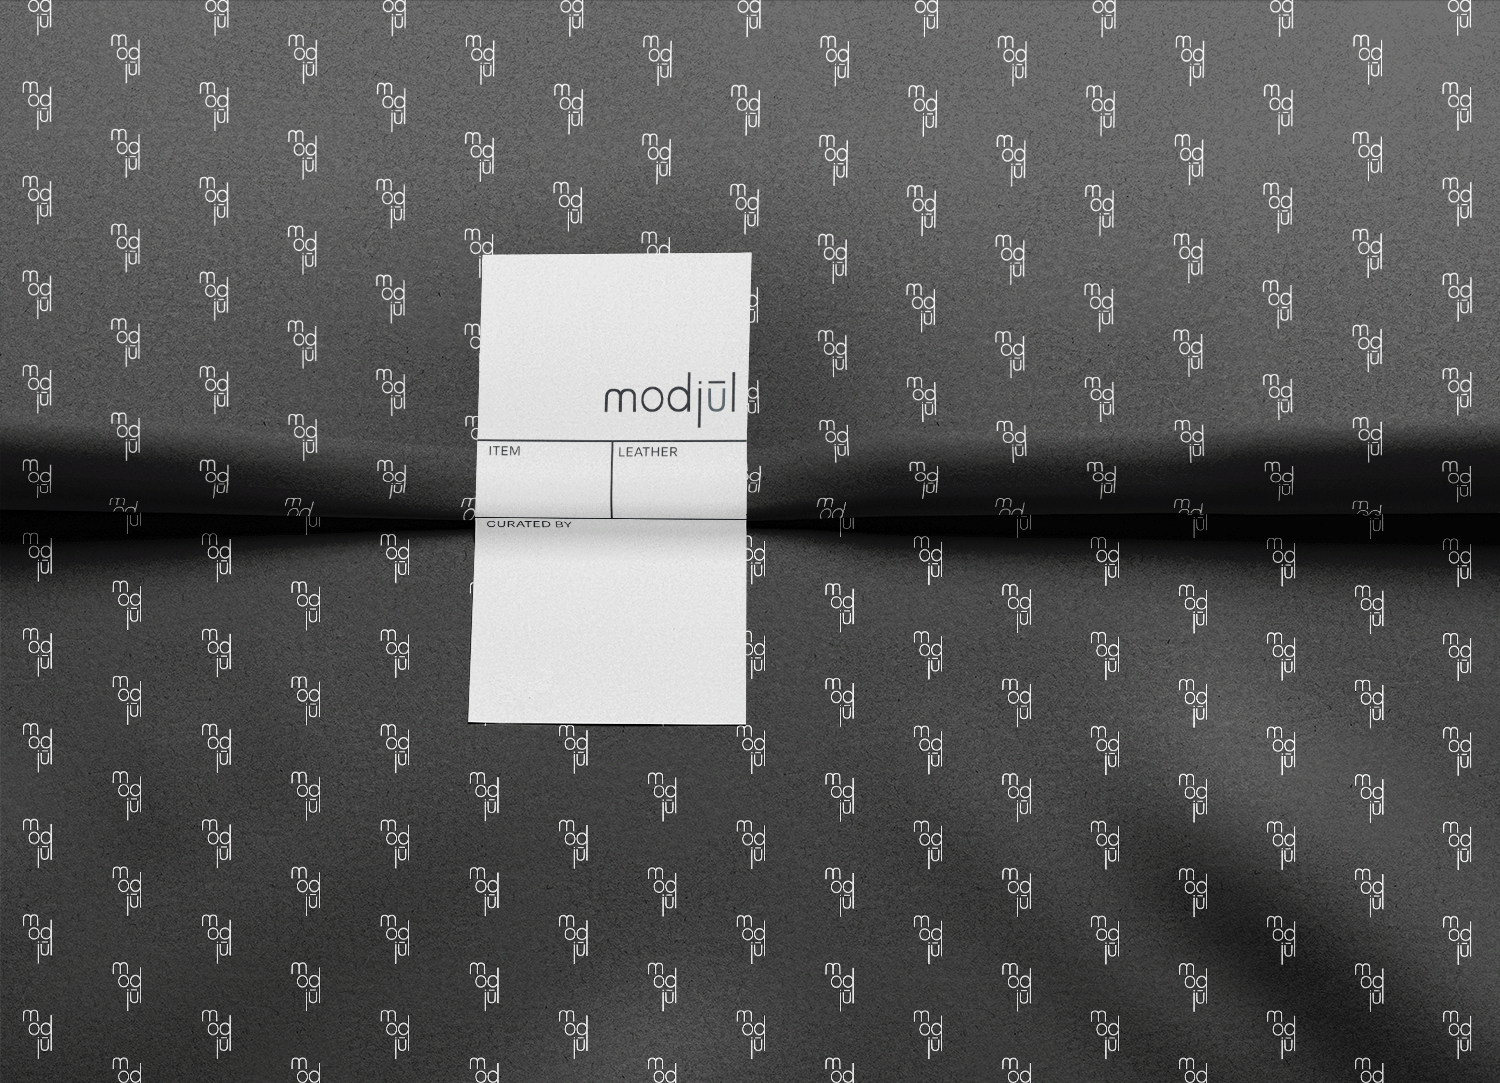 A mockup of the tissue paper and custom sticker designed for modjūl.